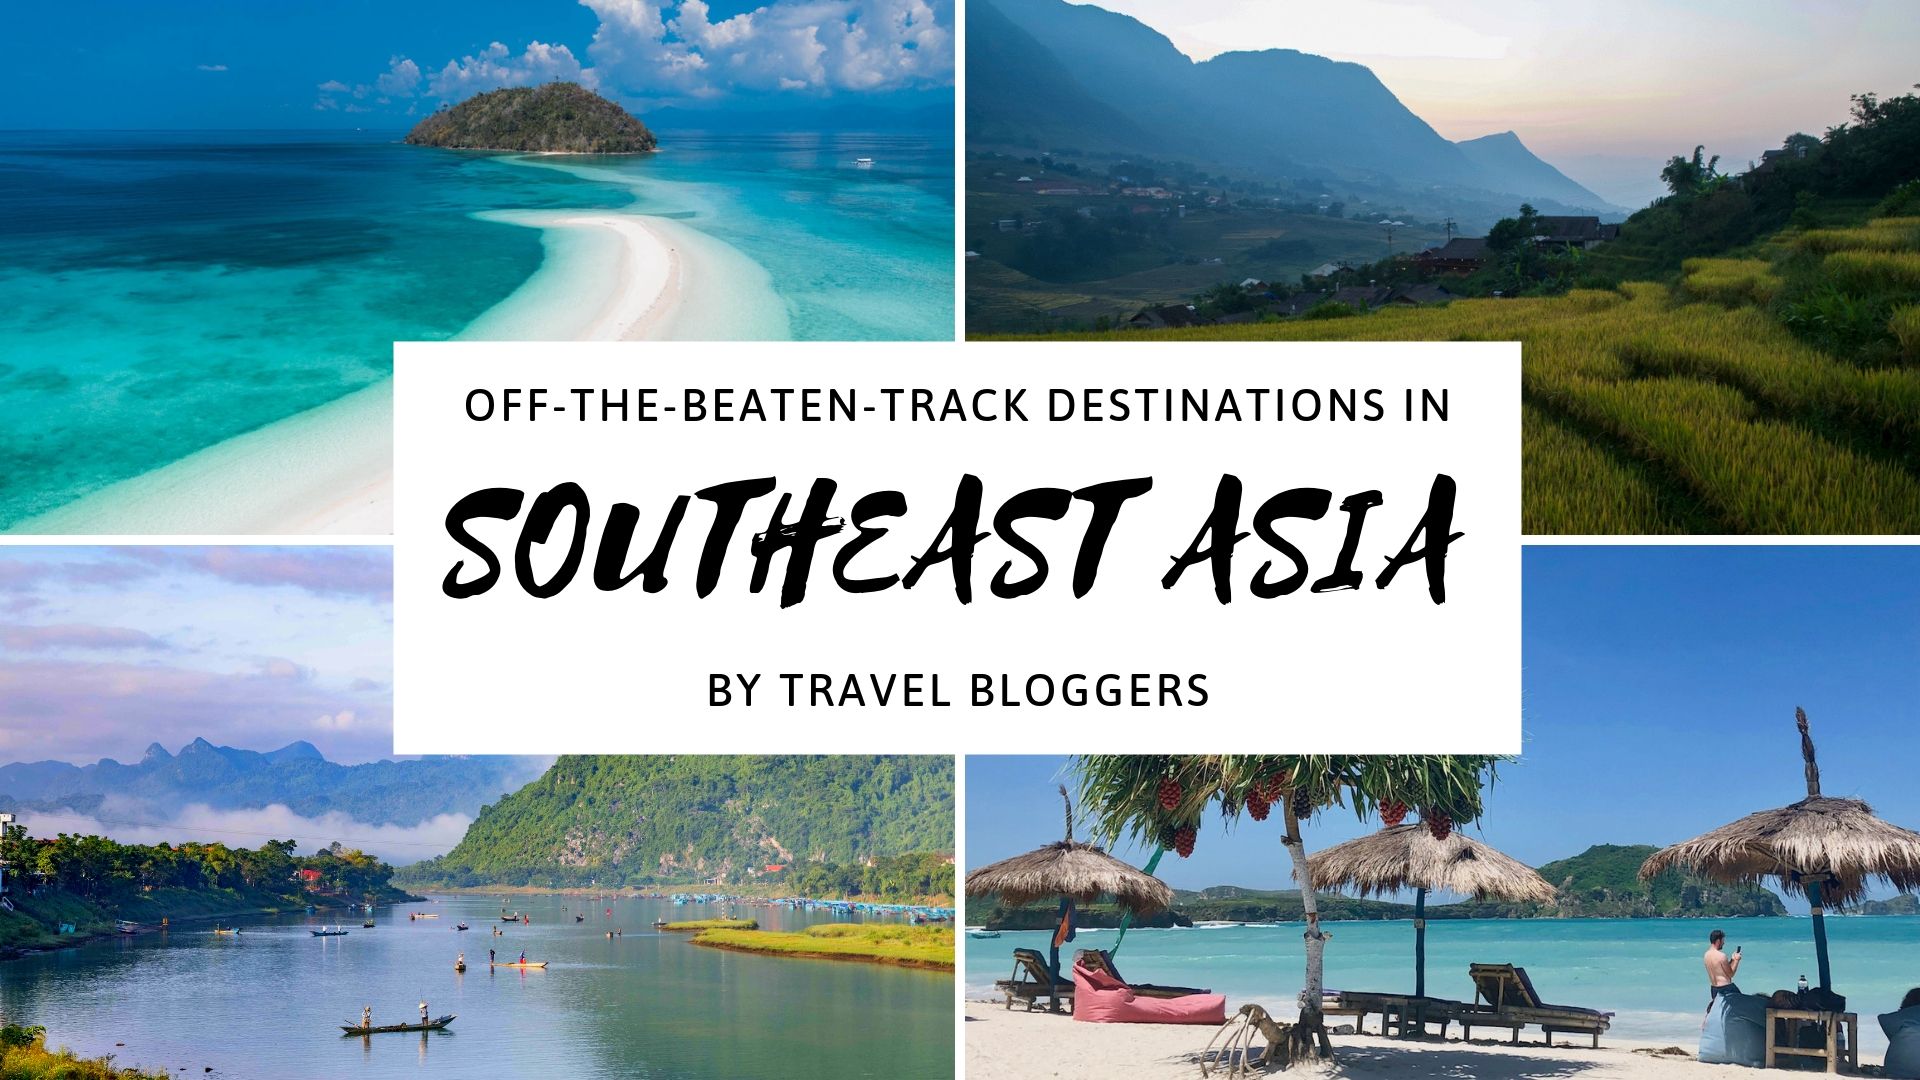 Off The Beaten Track Destinations In Southeast Asia For Backpackers Erika S Travelventures